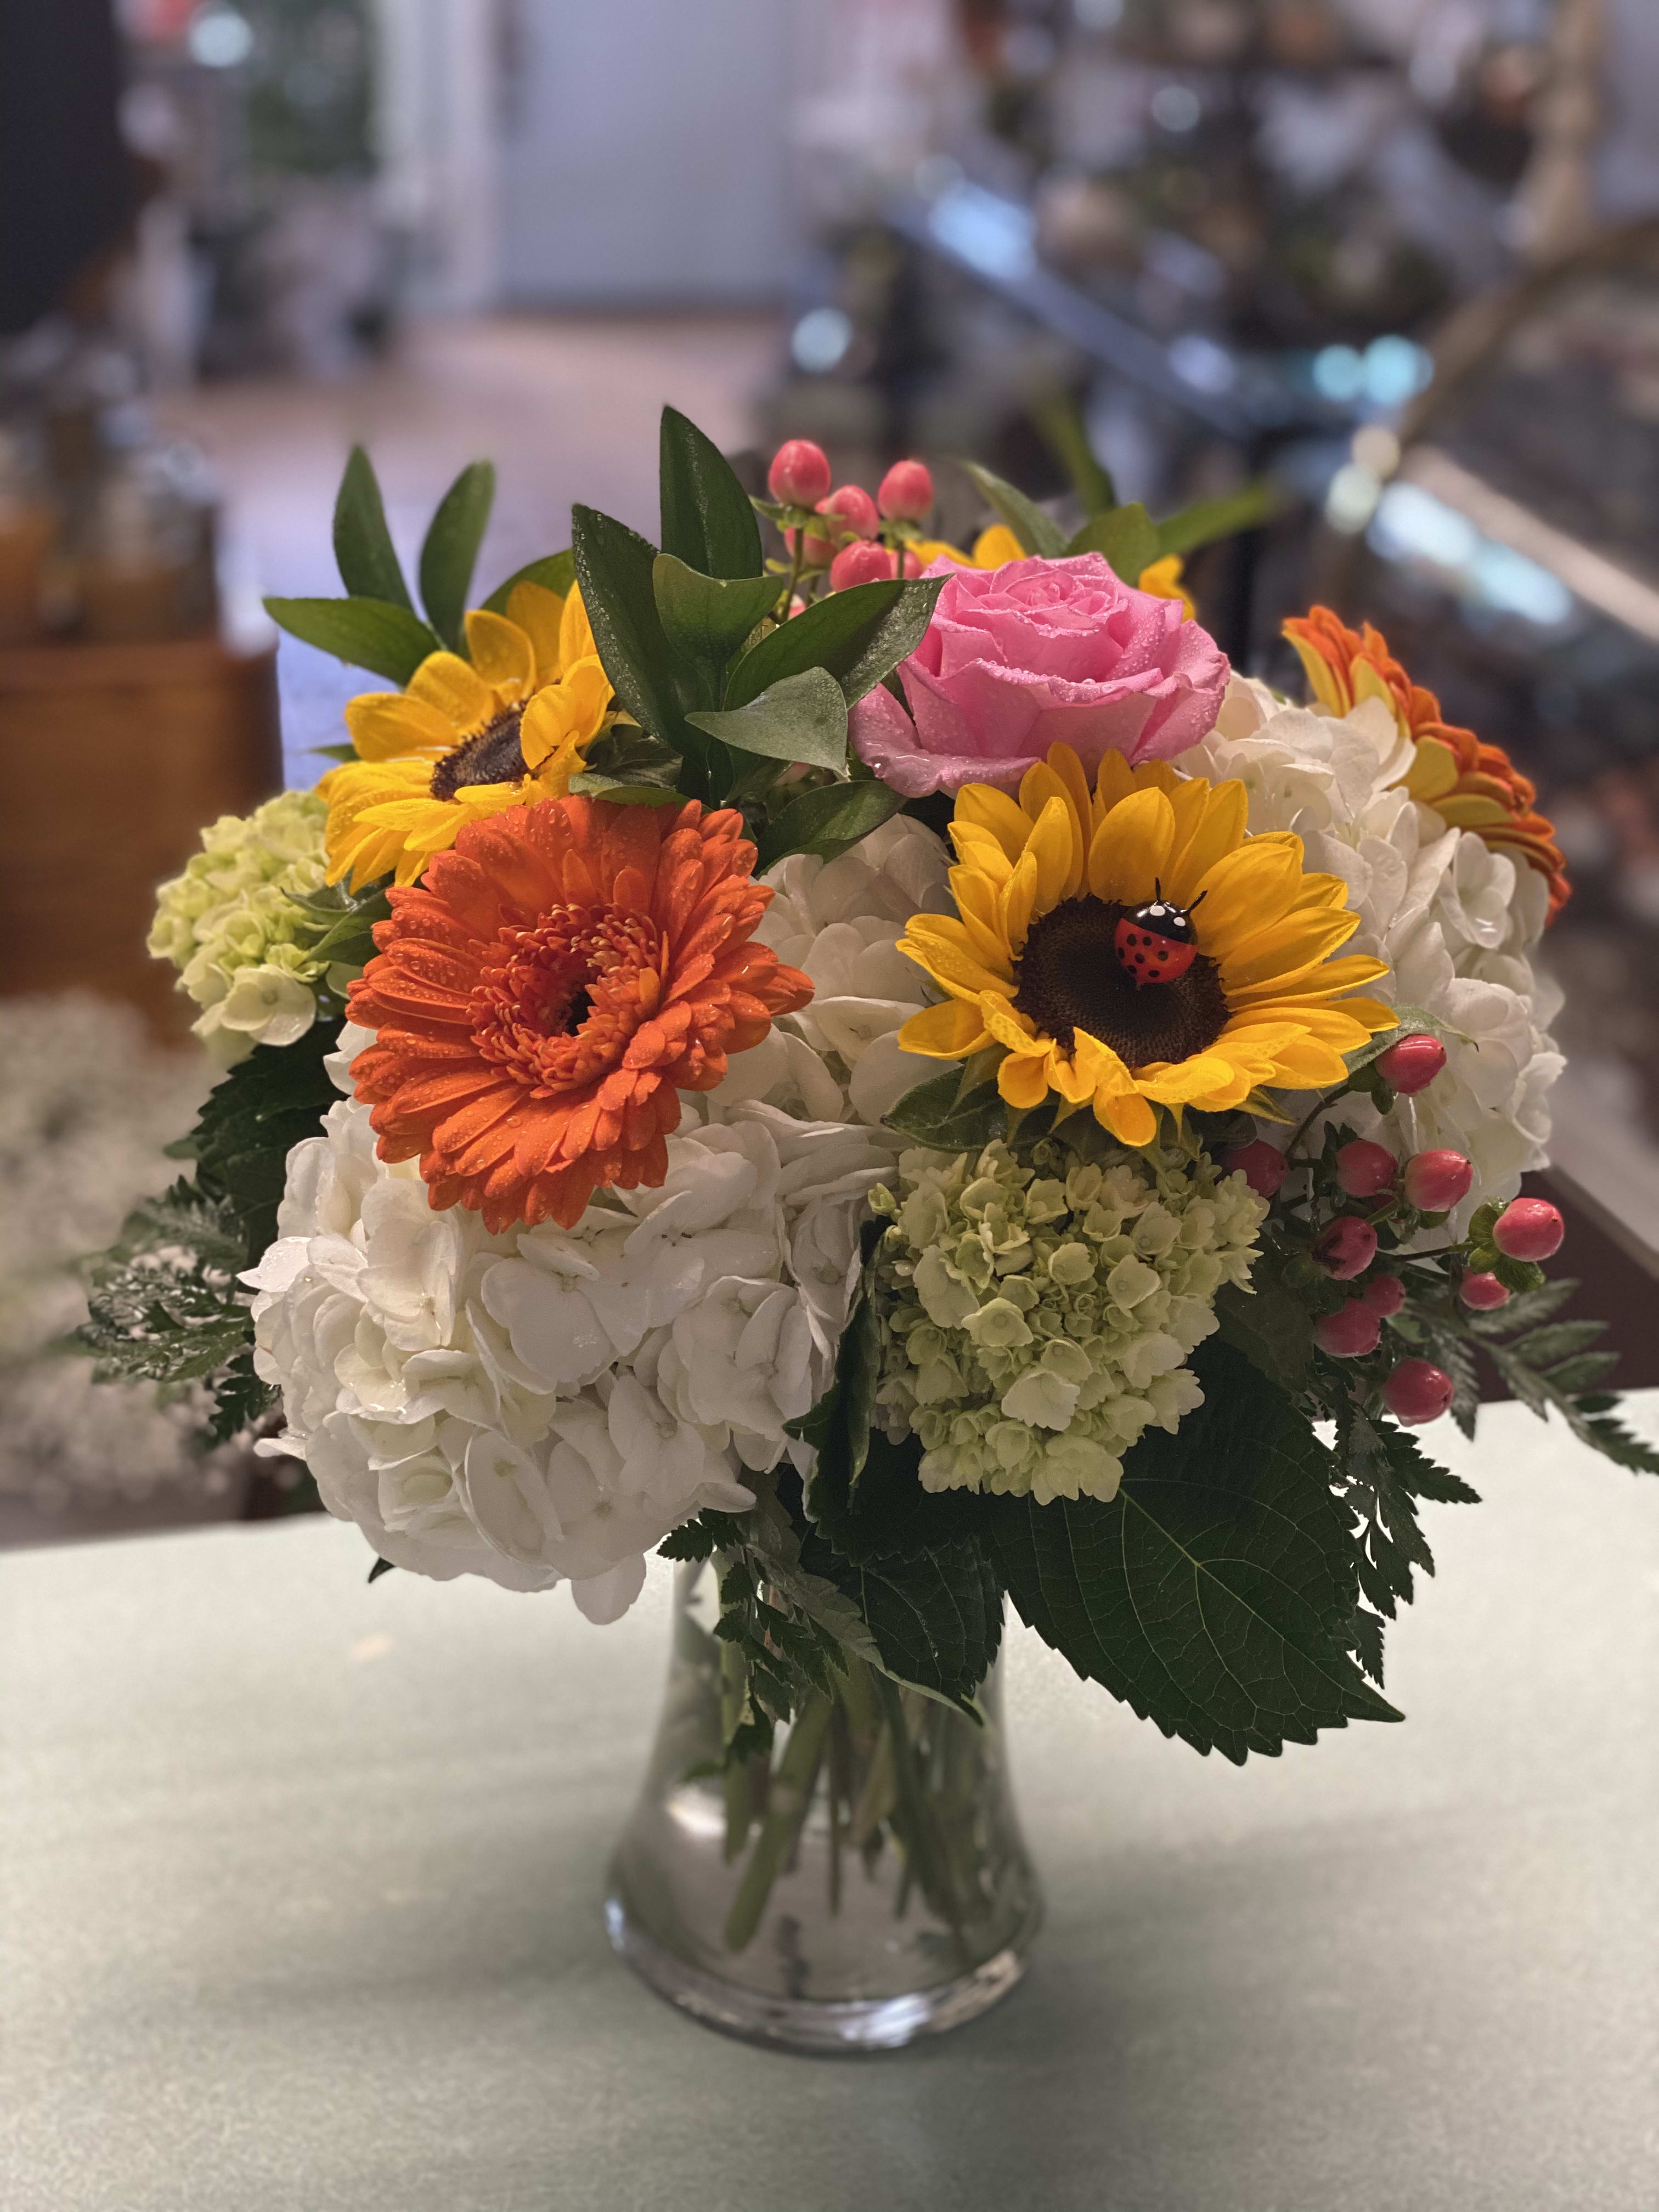 Happiness In a Vase - White hydrangeas, mini green hydrangea, sunflowers (with an adorable ladybug), roses, gerber all arranged beautifully in a clear glass vase